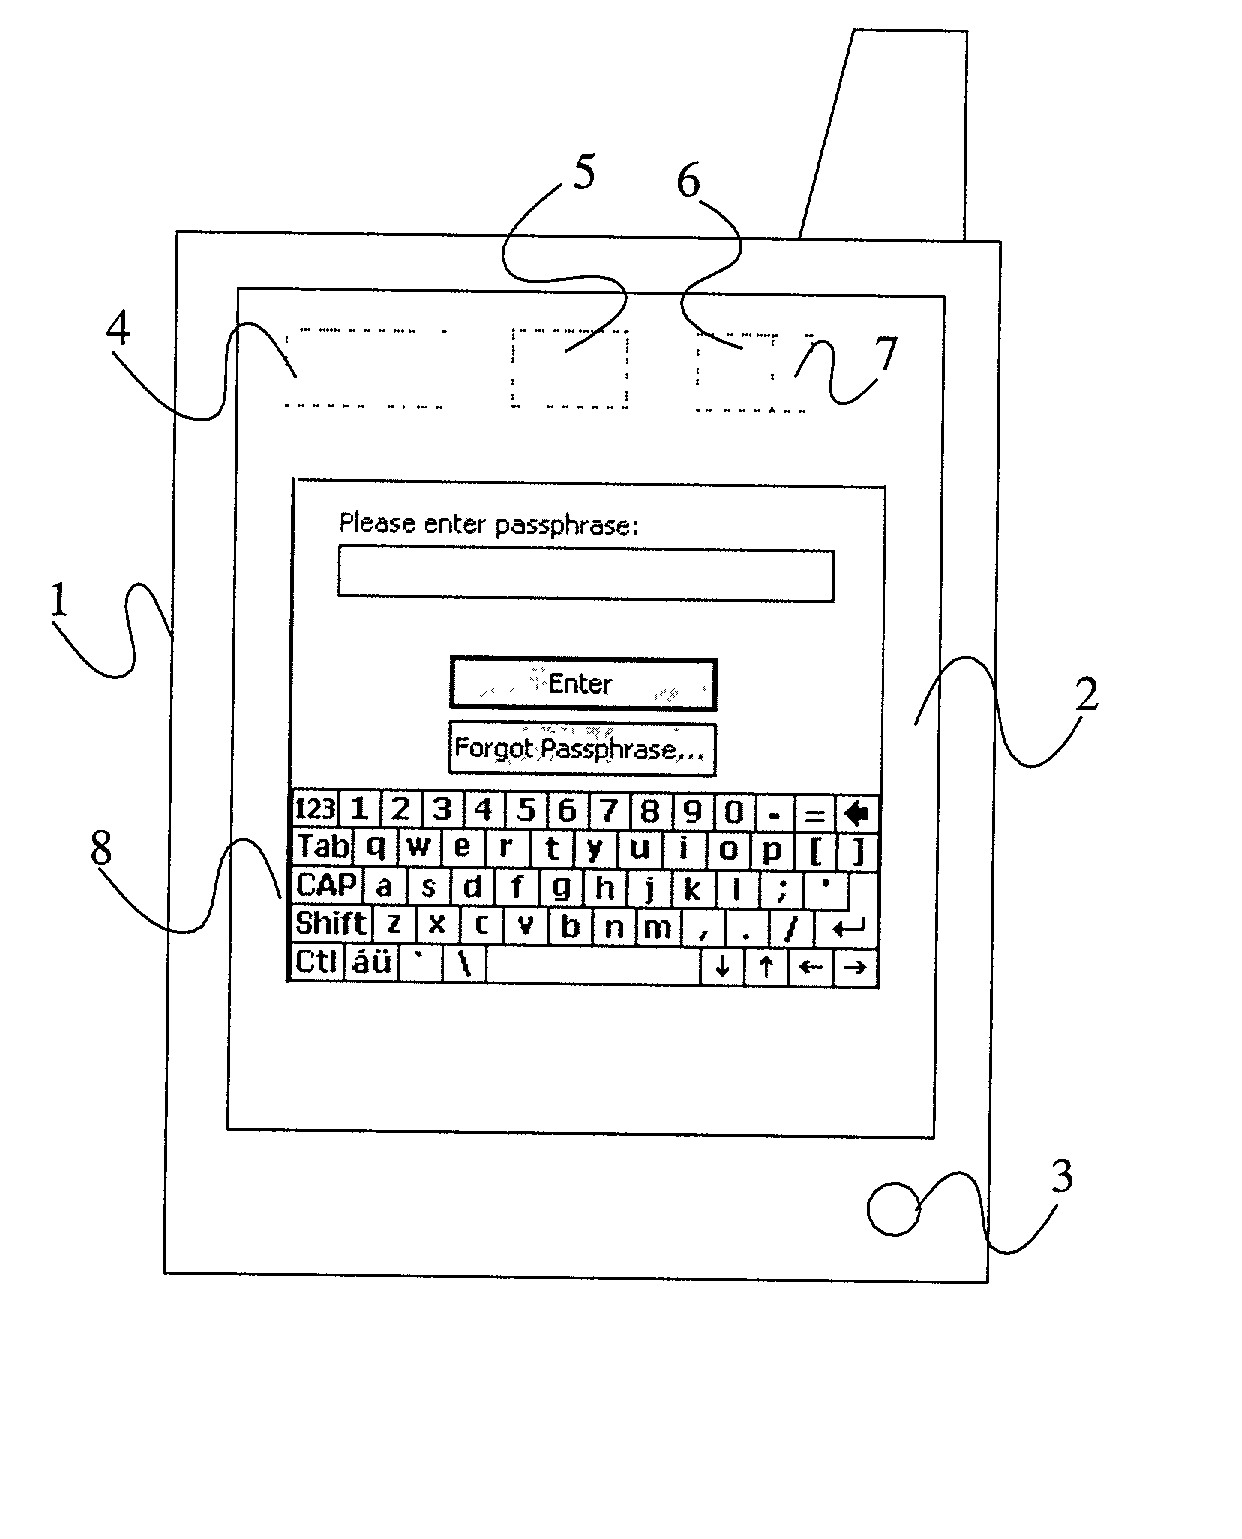 Computer security method and apparatus